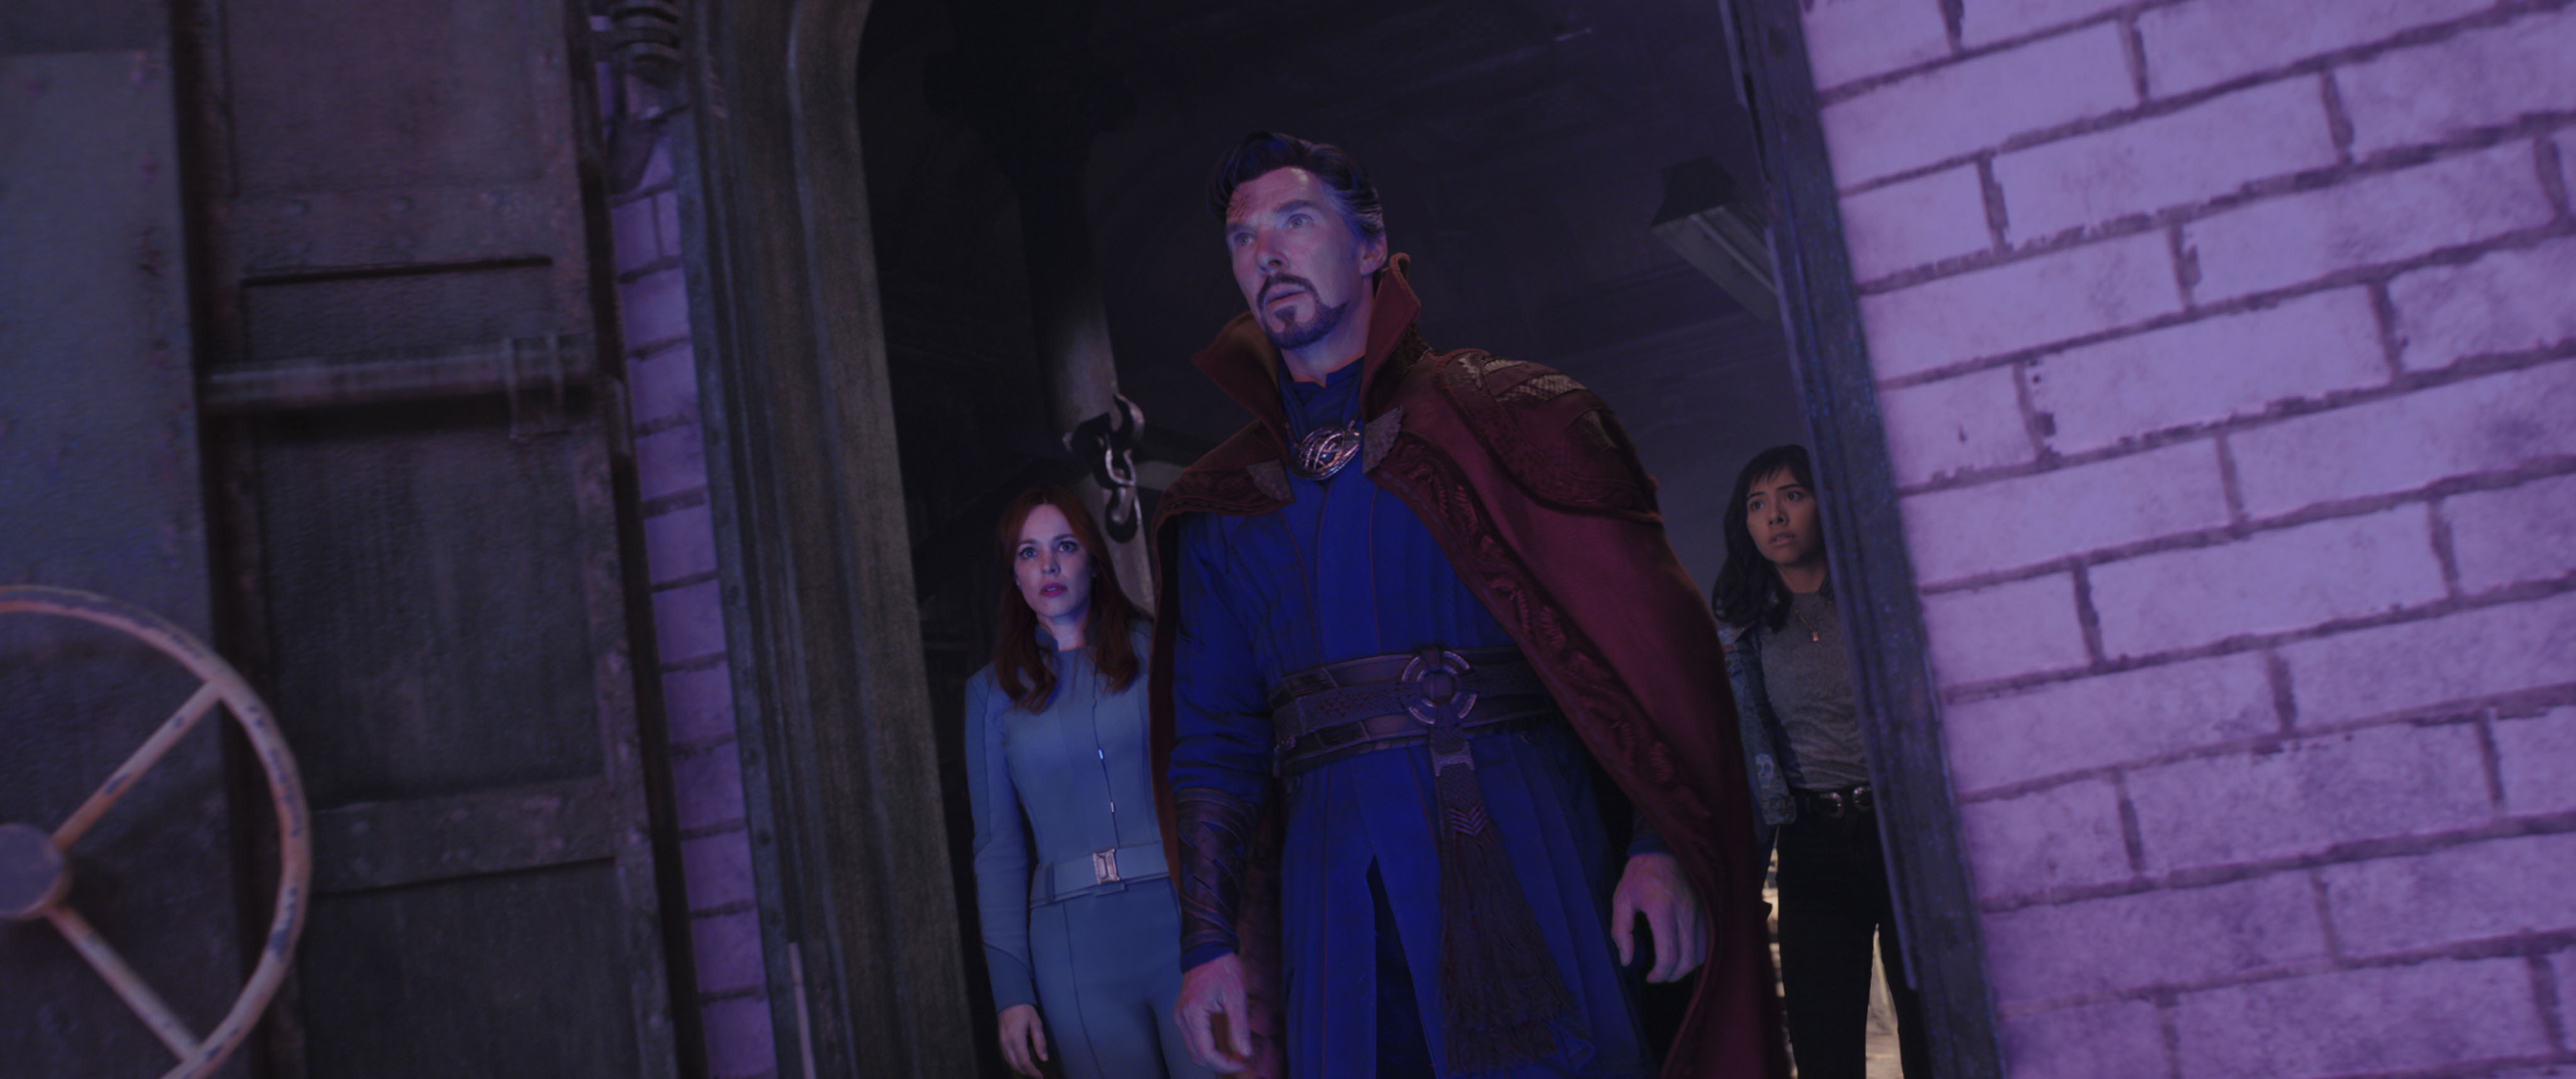 Rachel McAdams as Dr. Christine Palmer, Benedict Cumberbatch as Dr. Stephen Strange, and Xochitl Gomez as America Chavez in DOCTOR STRANGE IN THE MULTIVERSE OF MADNESS. (Courtesy of Marvel Studios)